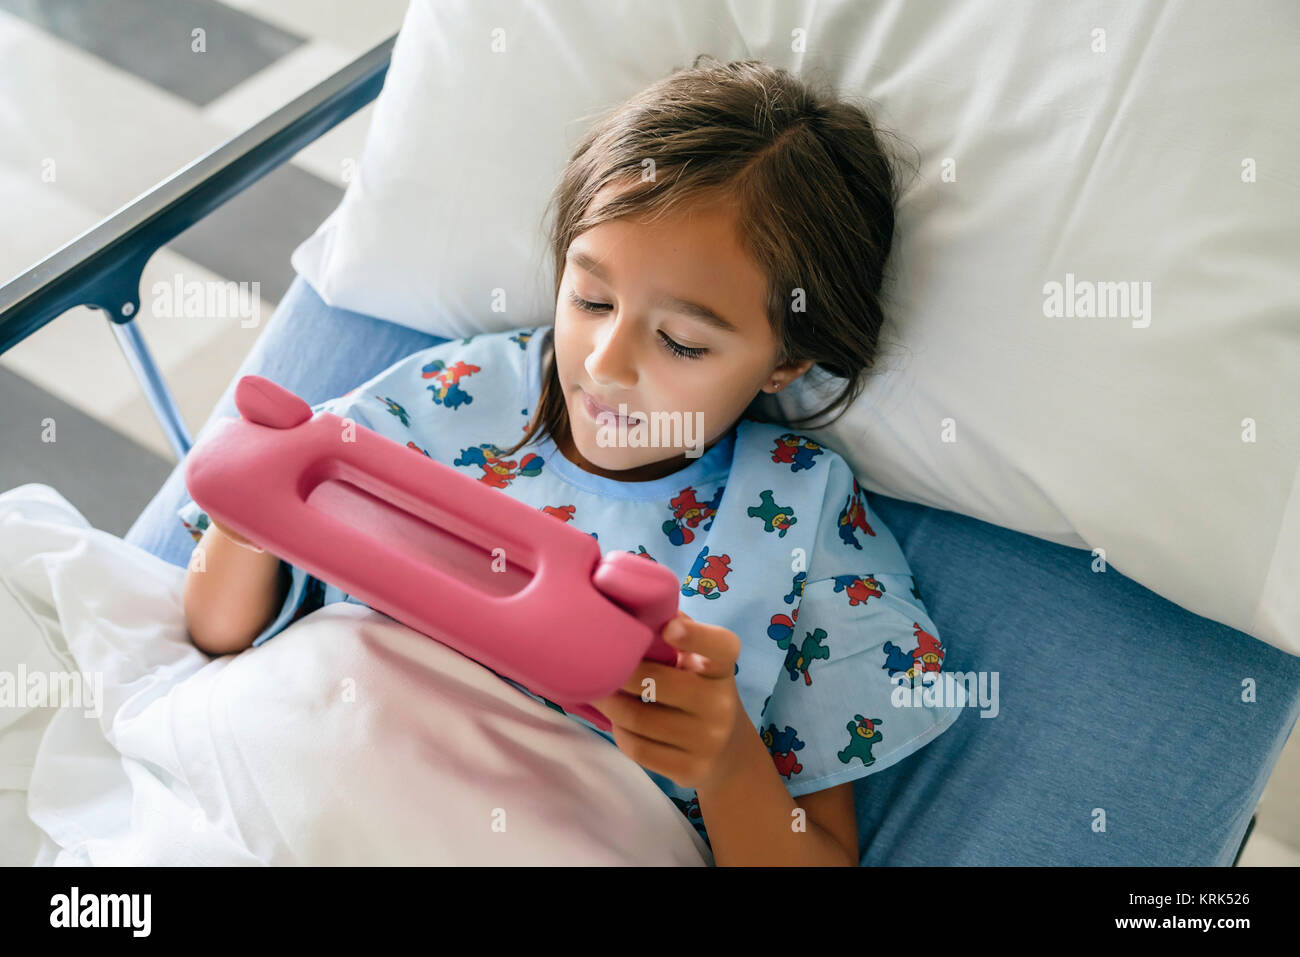 Mixed Race girl using digital tablet in hospital bed Banque D'Images